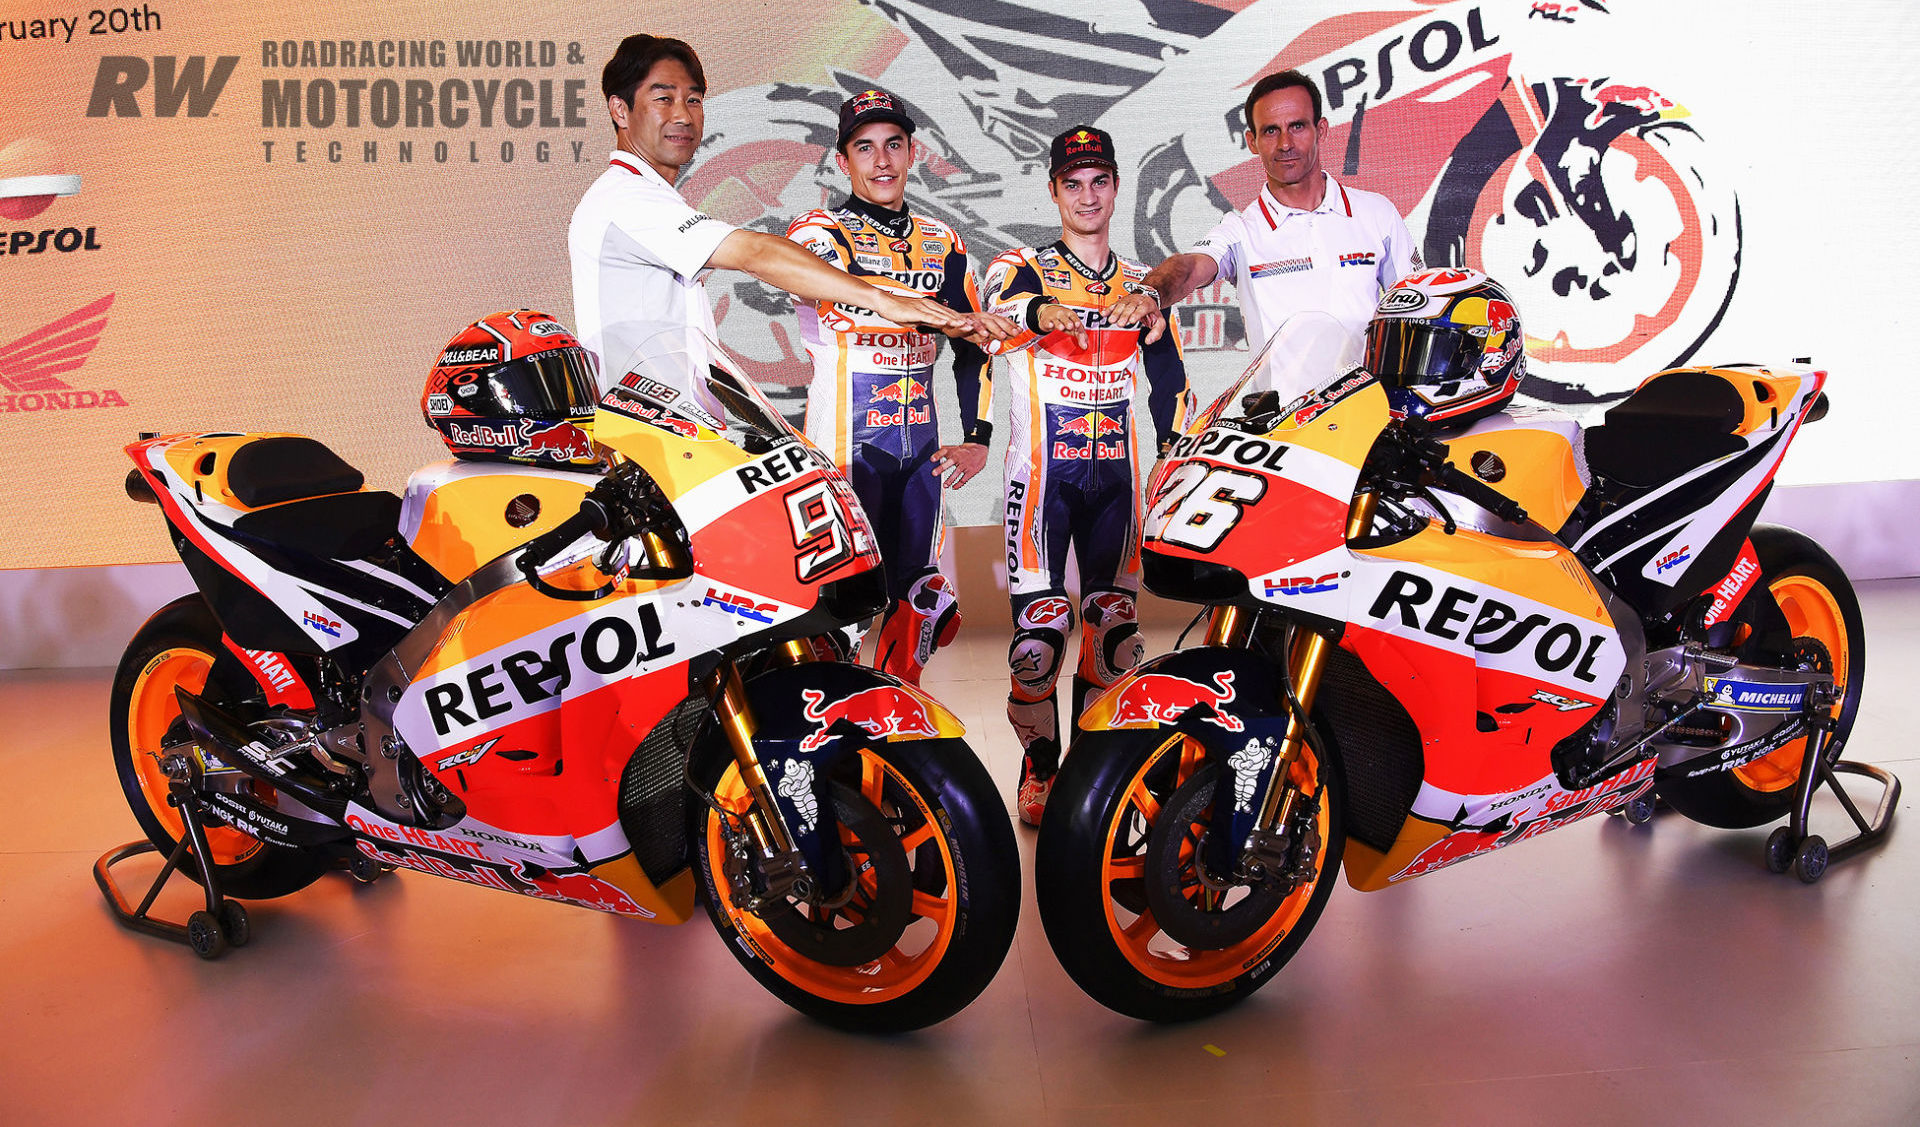 Team Manager Alberto Puig (right) is shown at the 2018 Repsol Honda MotoGP team presentation, with (from left) HRC's Tetshiro Kuwata, Marc Marquez, and Dani Pedrosa. Photo by DPPI.